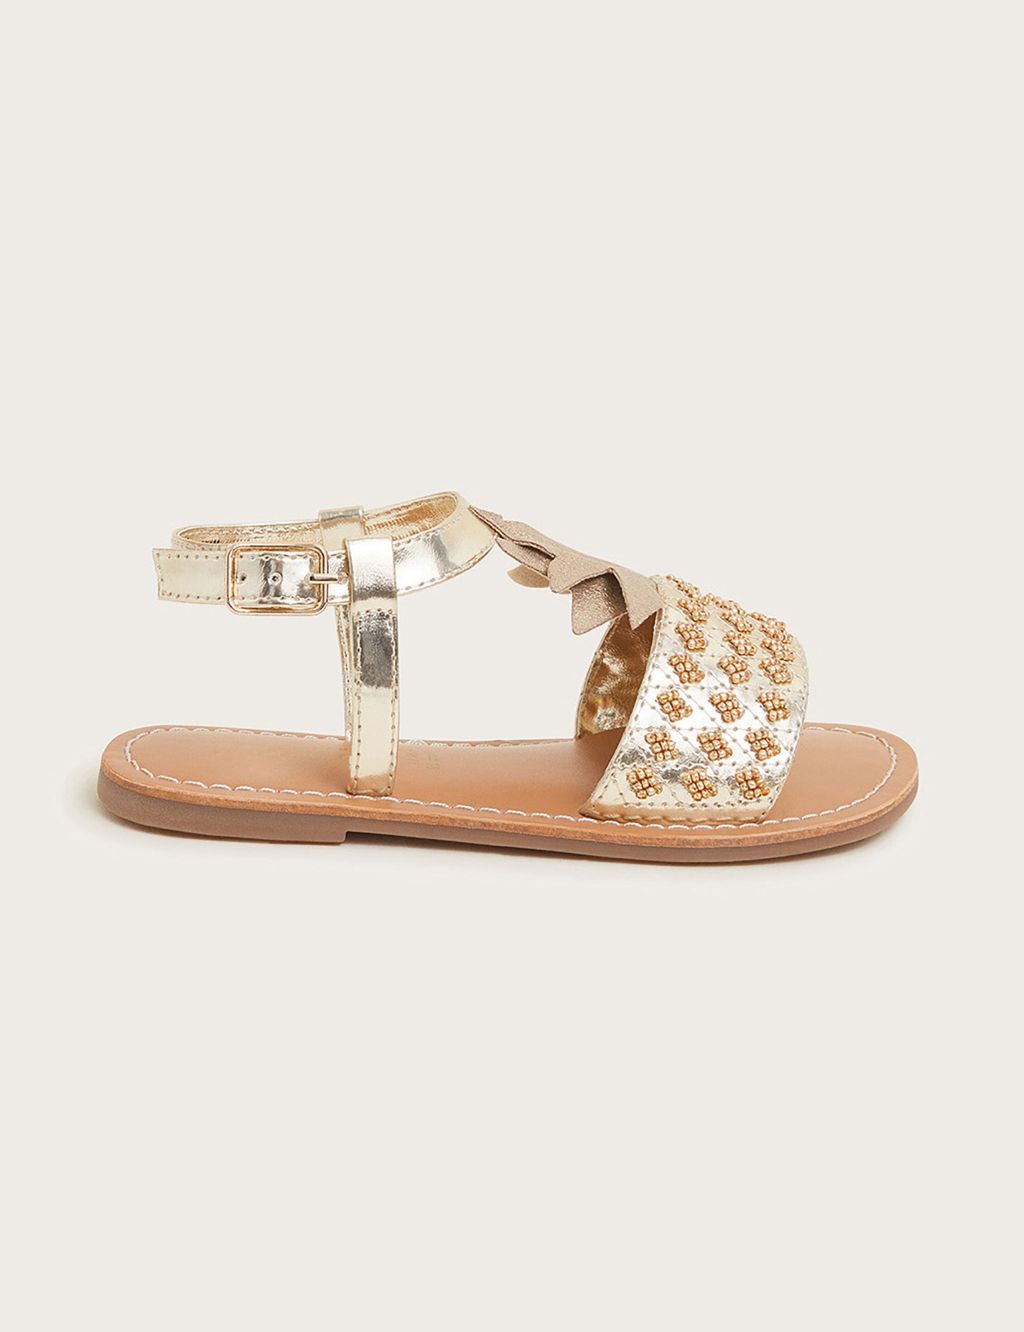 Kids' Pineapple Sandals (9 Small - 4 Large)